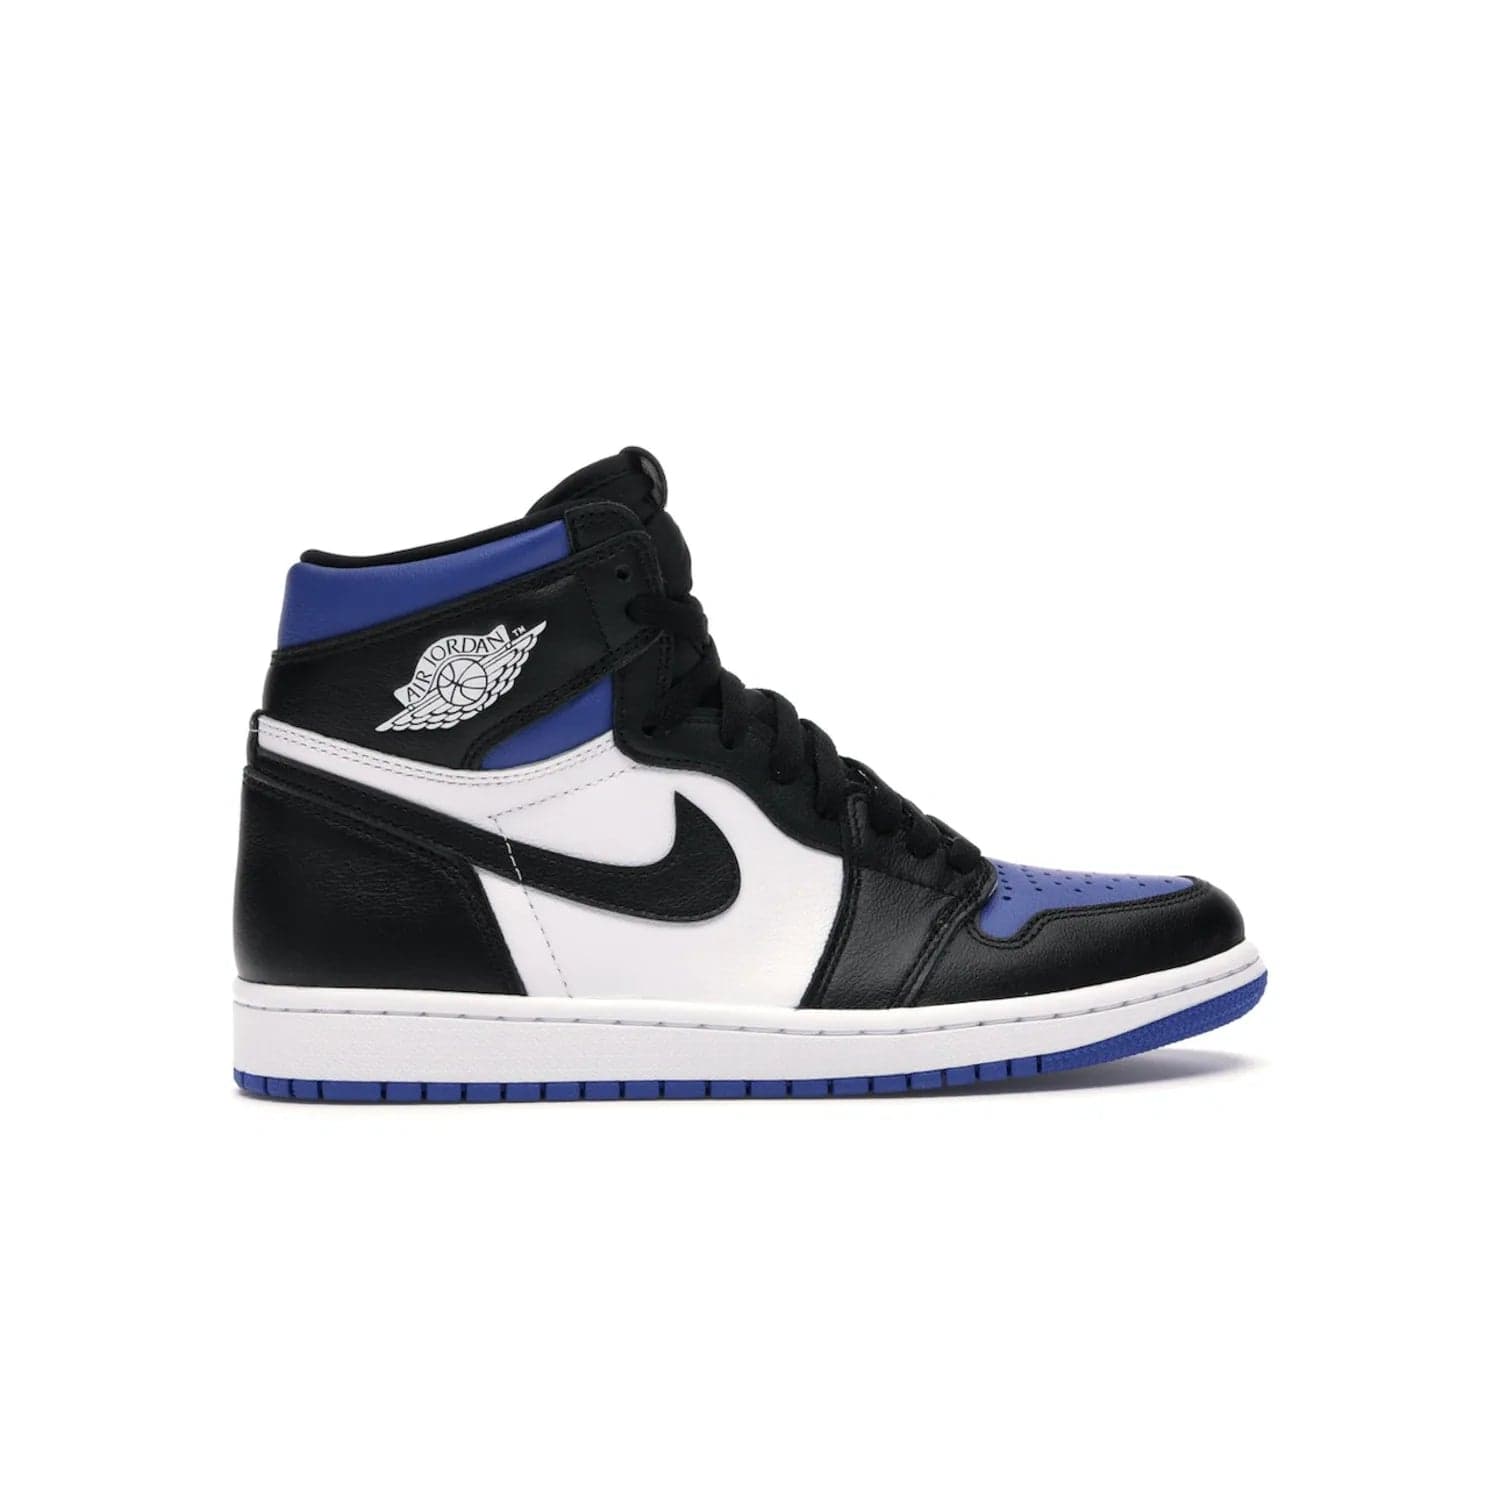 Jordan 1 Retro High Royal Toe - Image 36 - Only at www.BallersClubKickz.com - Refresh your look with the Jordan 1 Retro High Royal Toe. This classic AJ 1 sports a white and royal leather upper, black leather overlays, and branded leather tongue tag. Pick up today and set the streets ablaze.